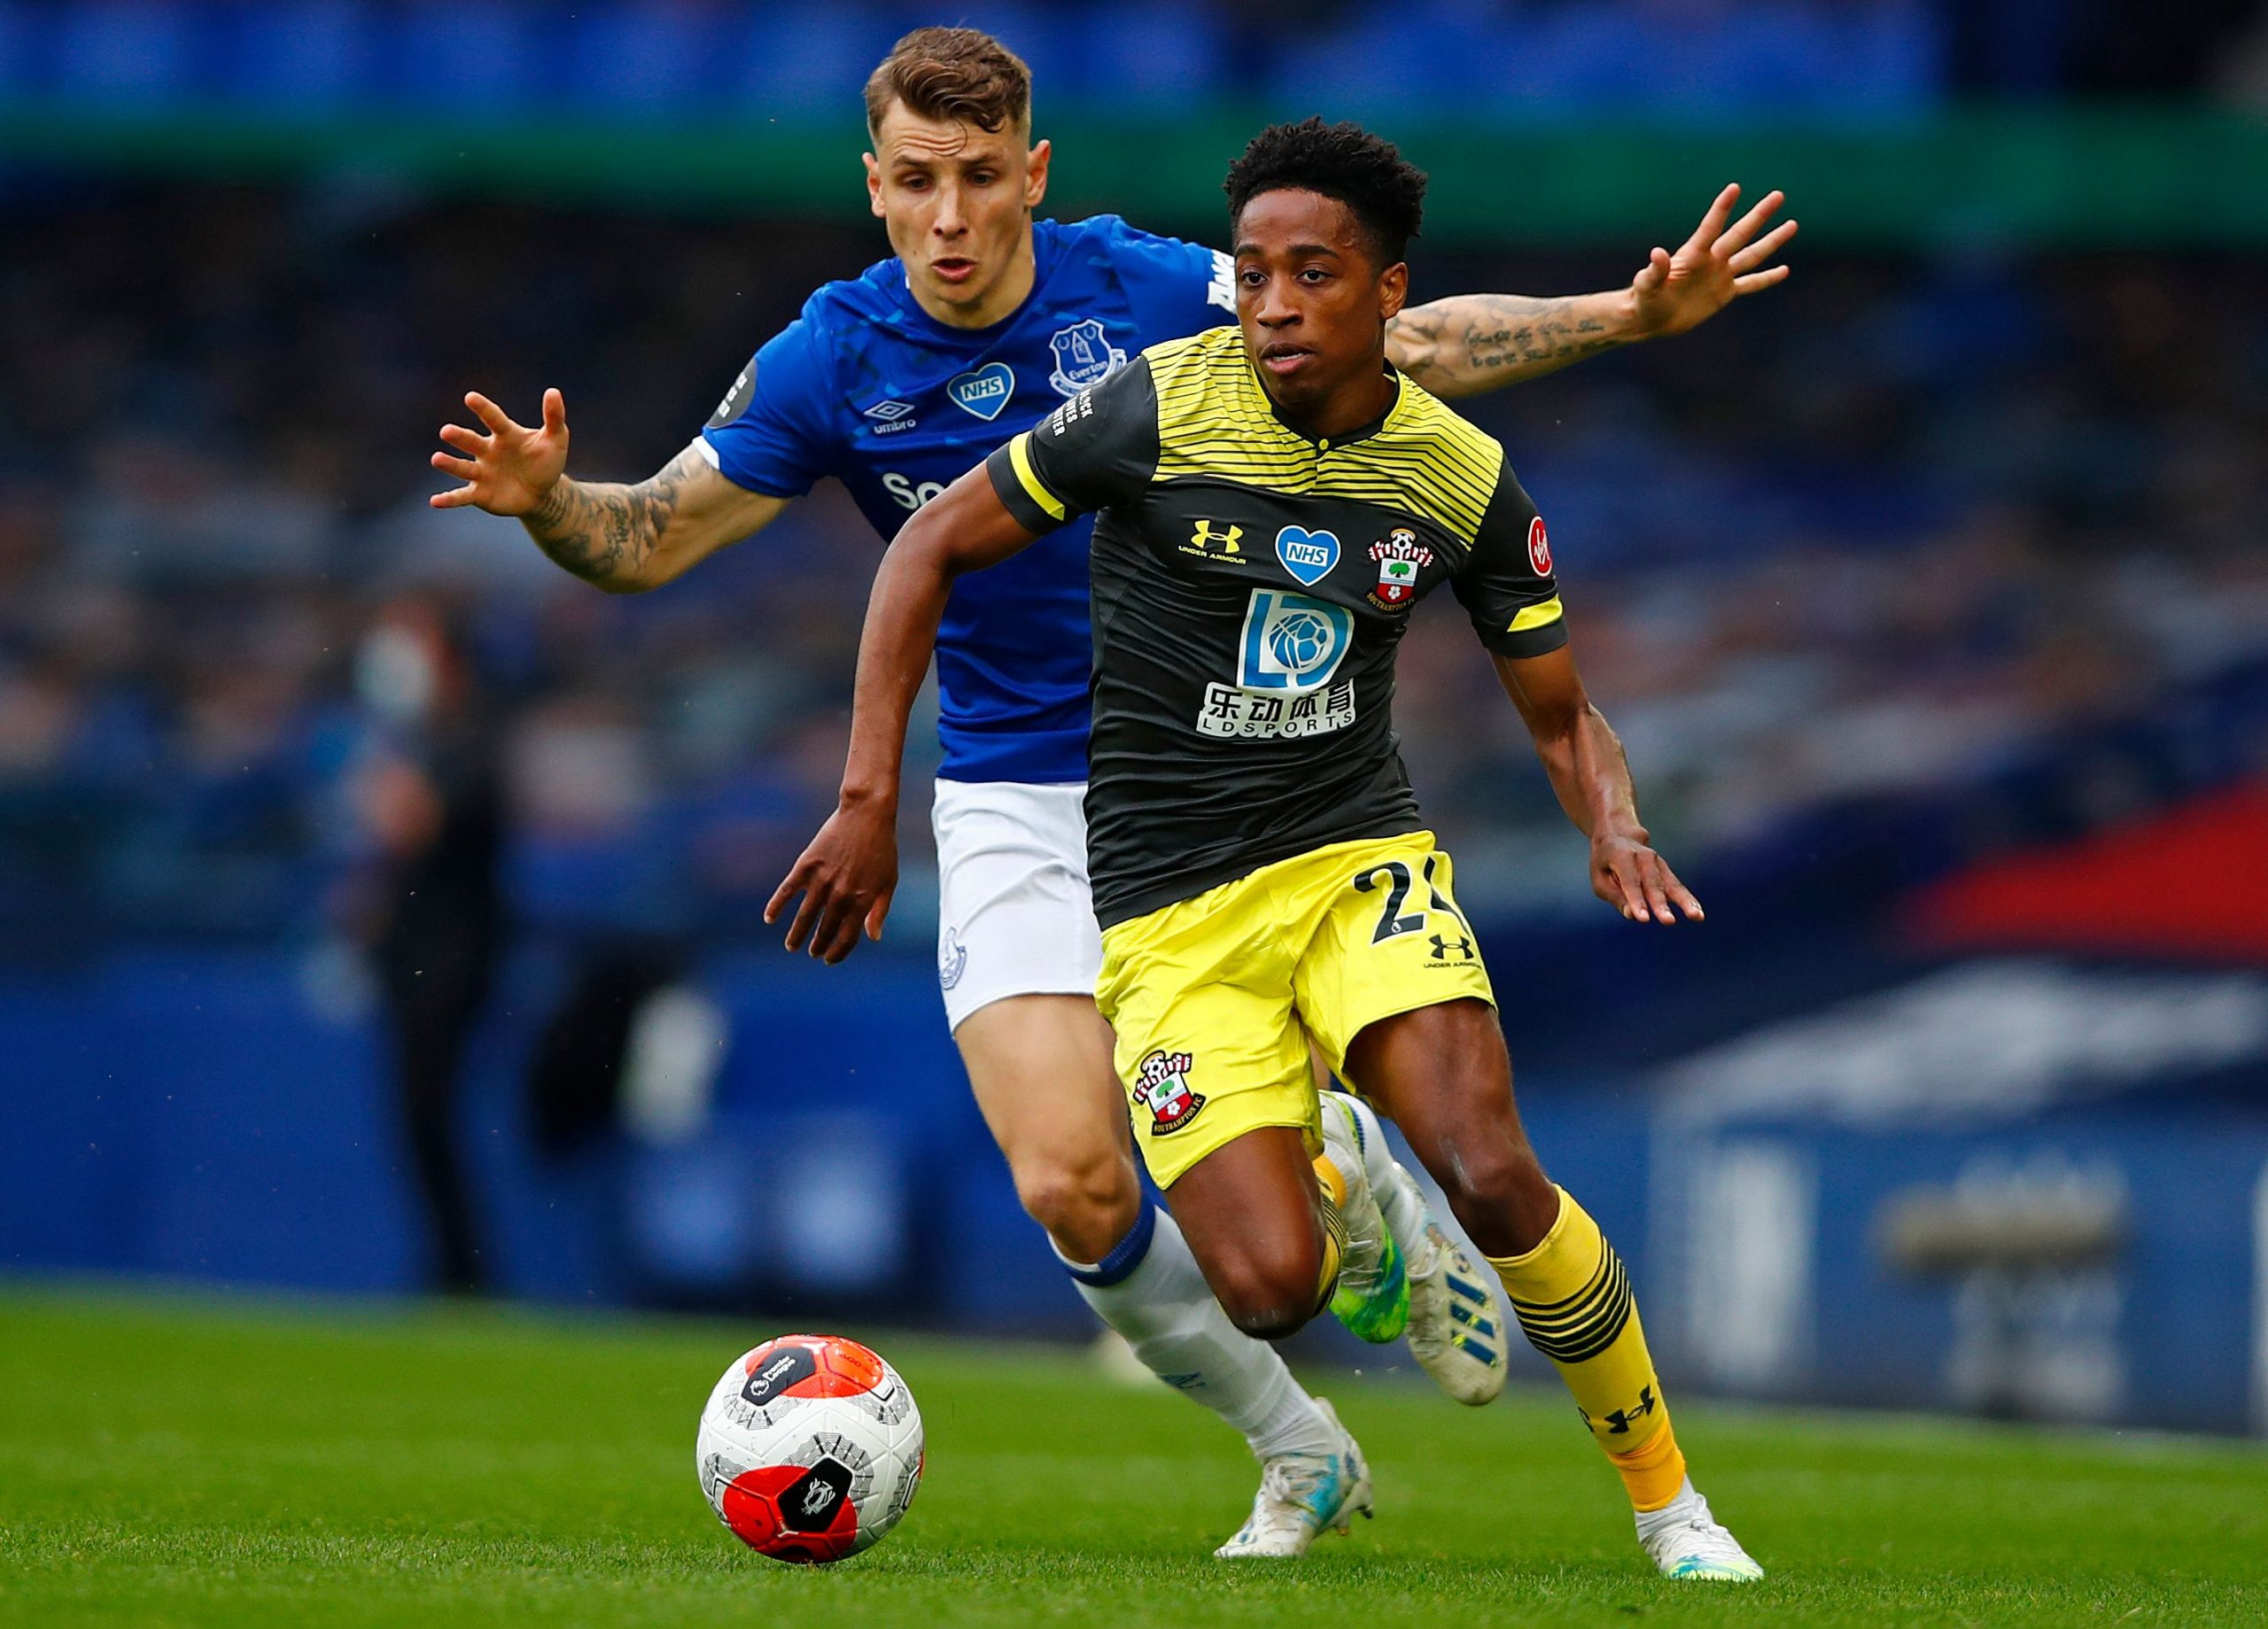 Kyle Walker-Peters has been impressive in recent games for on-loan side Southampton, whom he joined back in January.